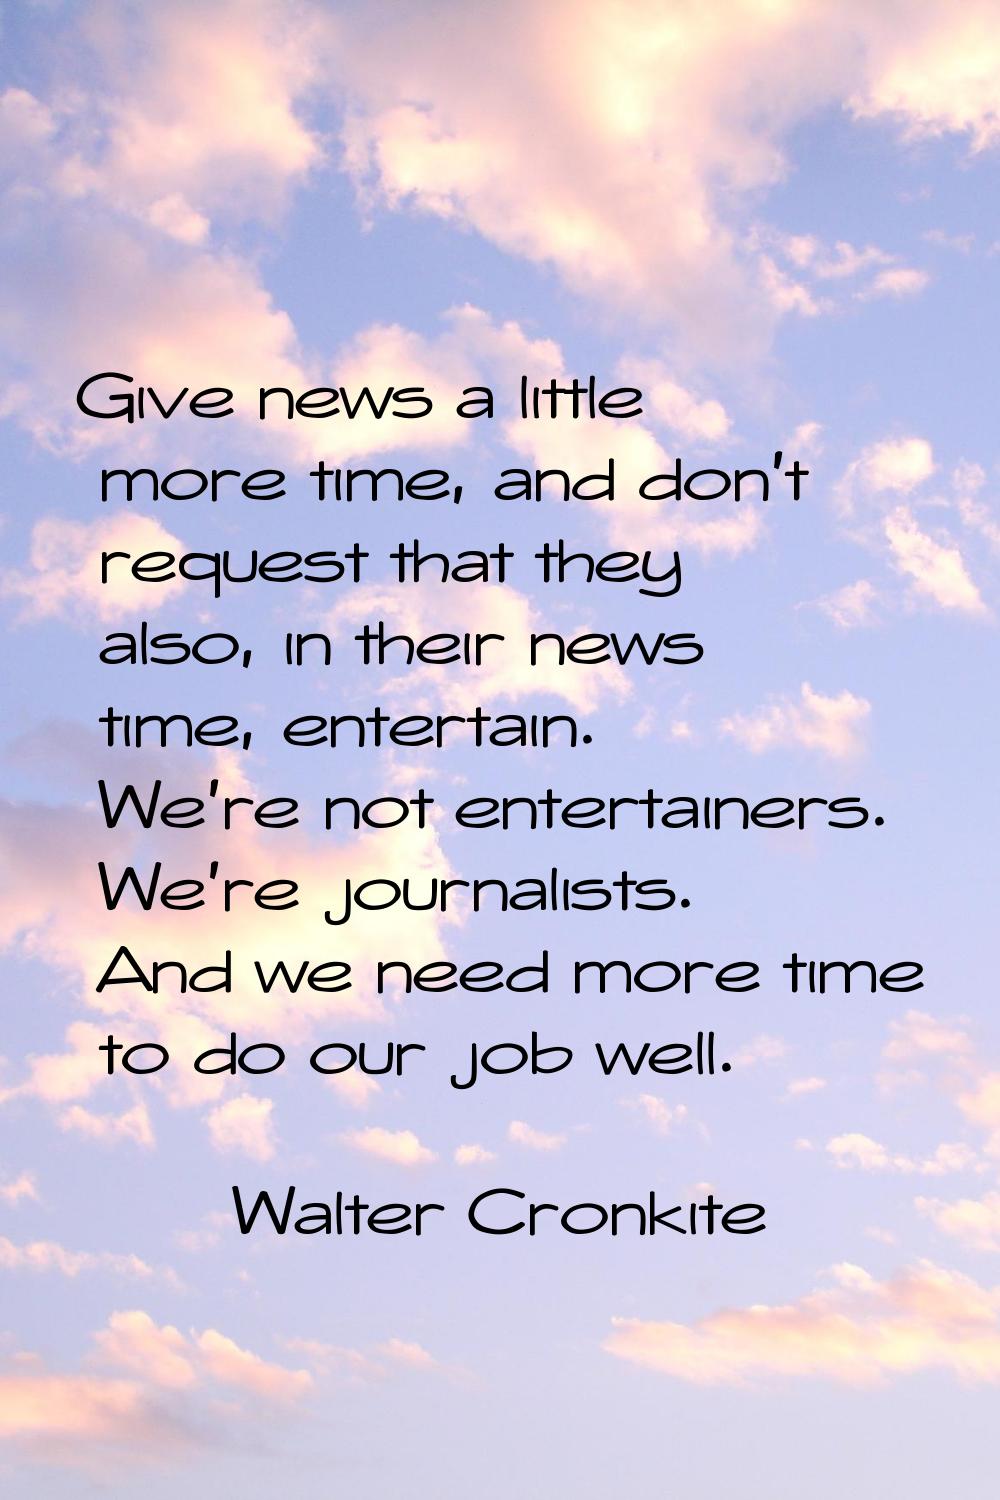 Give news a little more time, and don't request that they also, in their news time, entertain. We'r